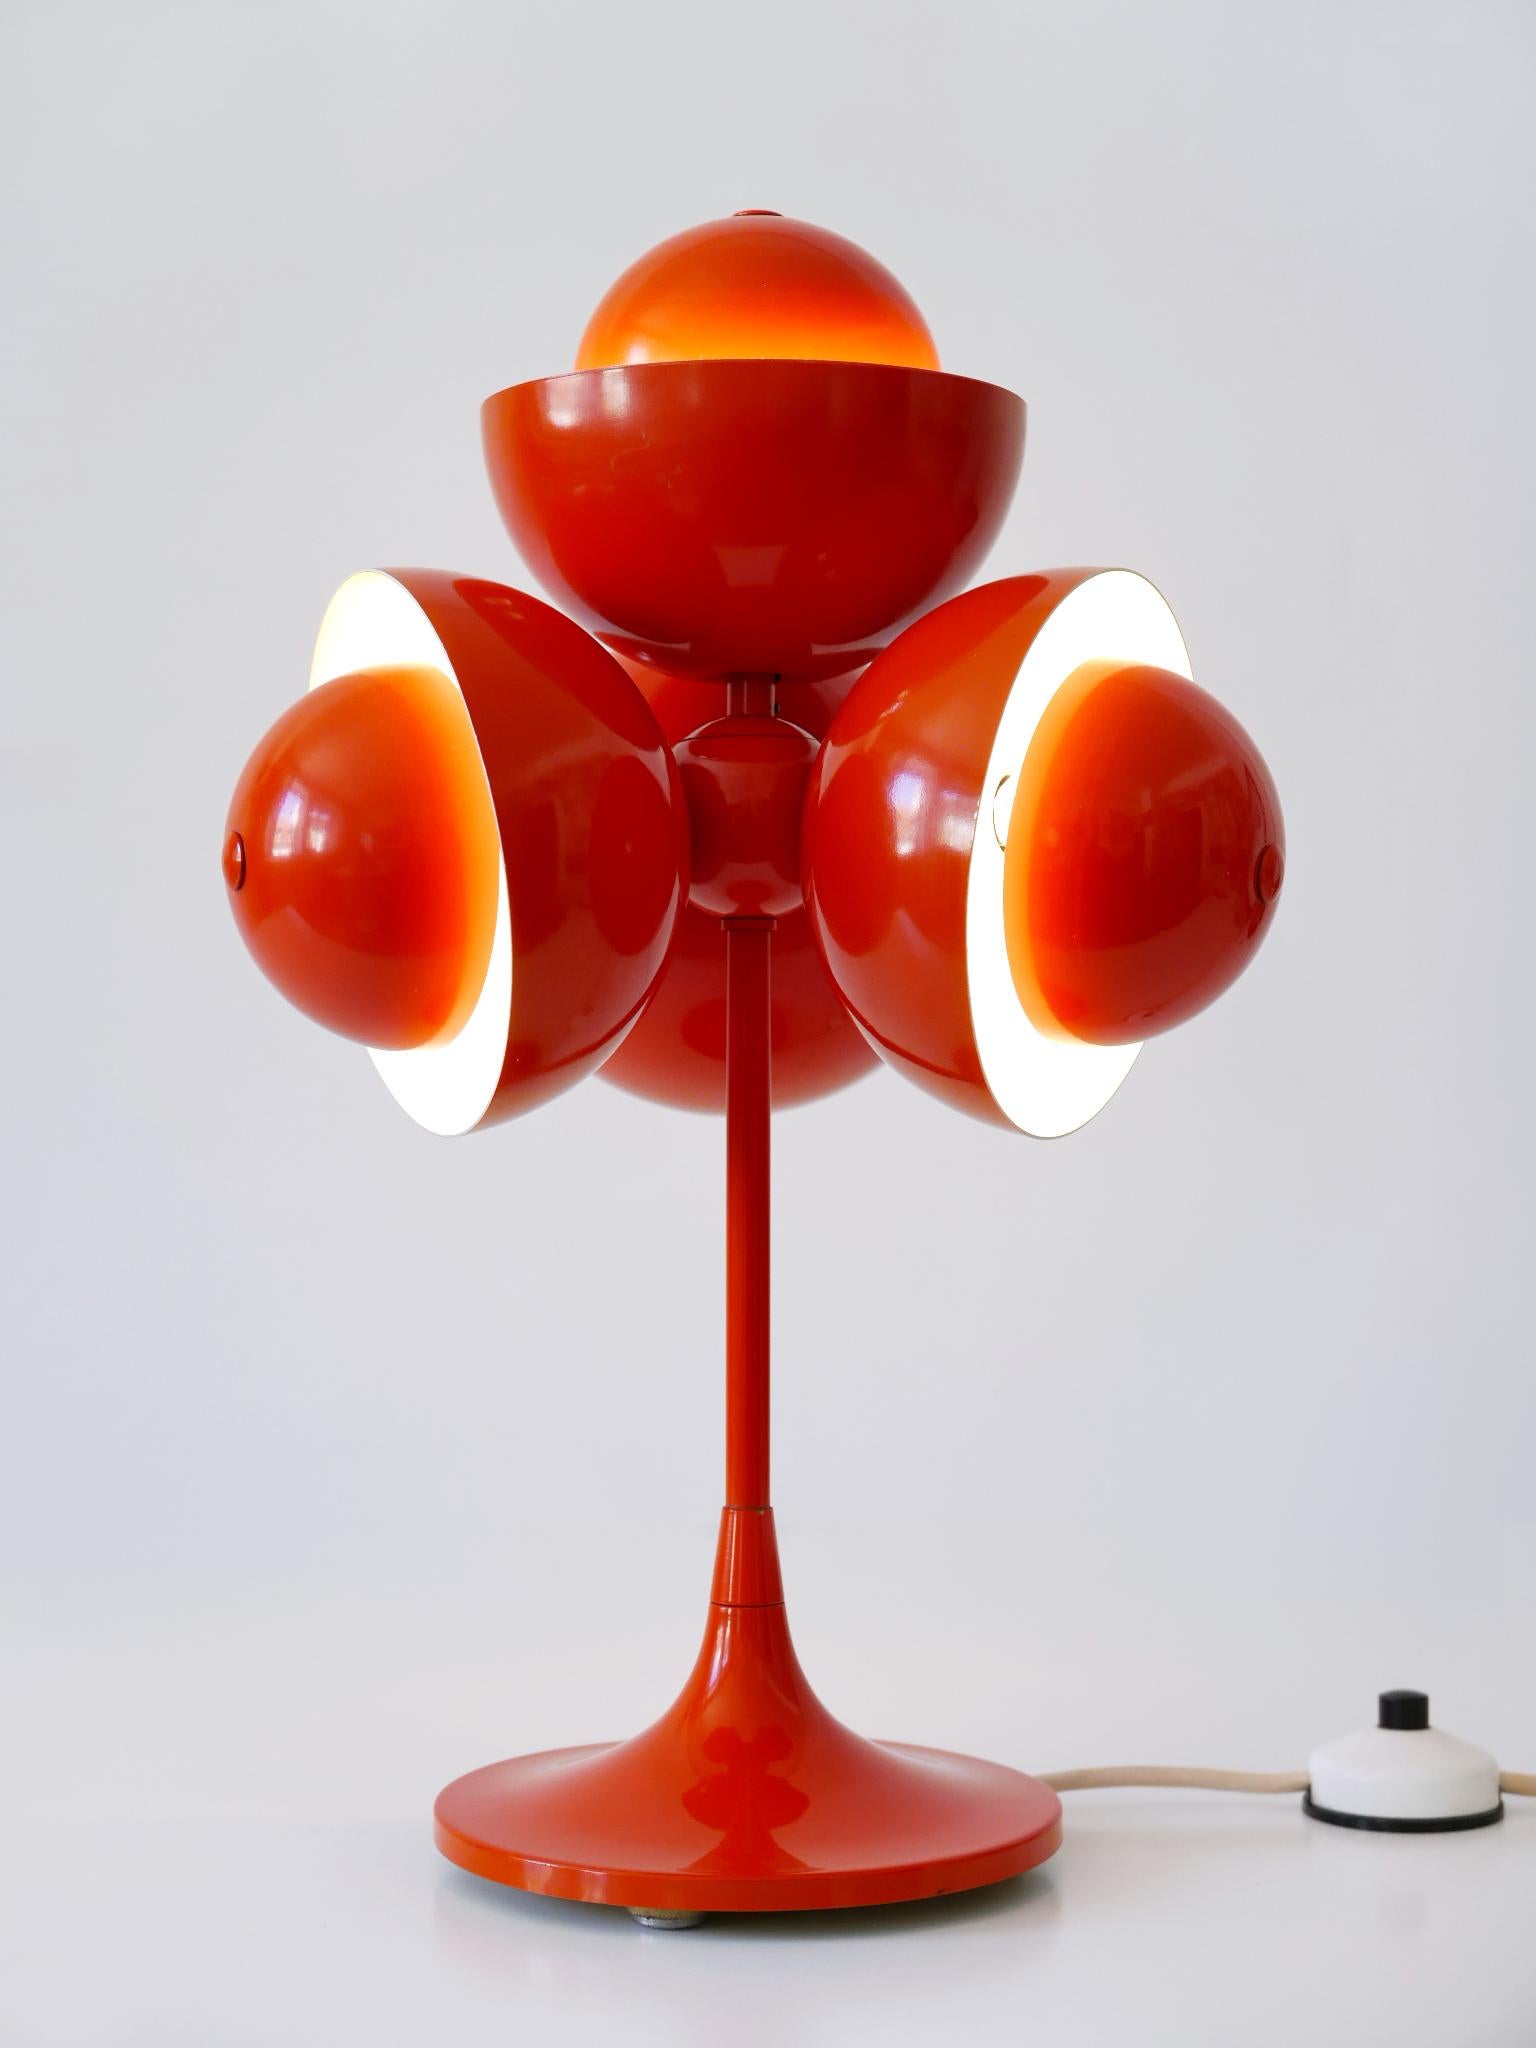 Exceptional & Lovely Mid-Century Modern Flowerpot Table Lamp, Germany, 1970s For Sale 6